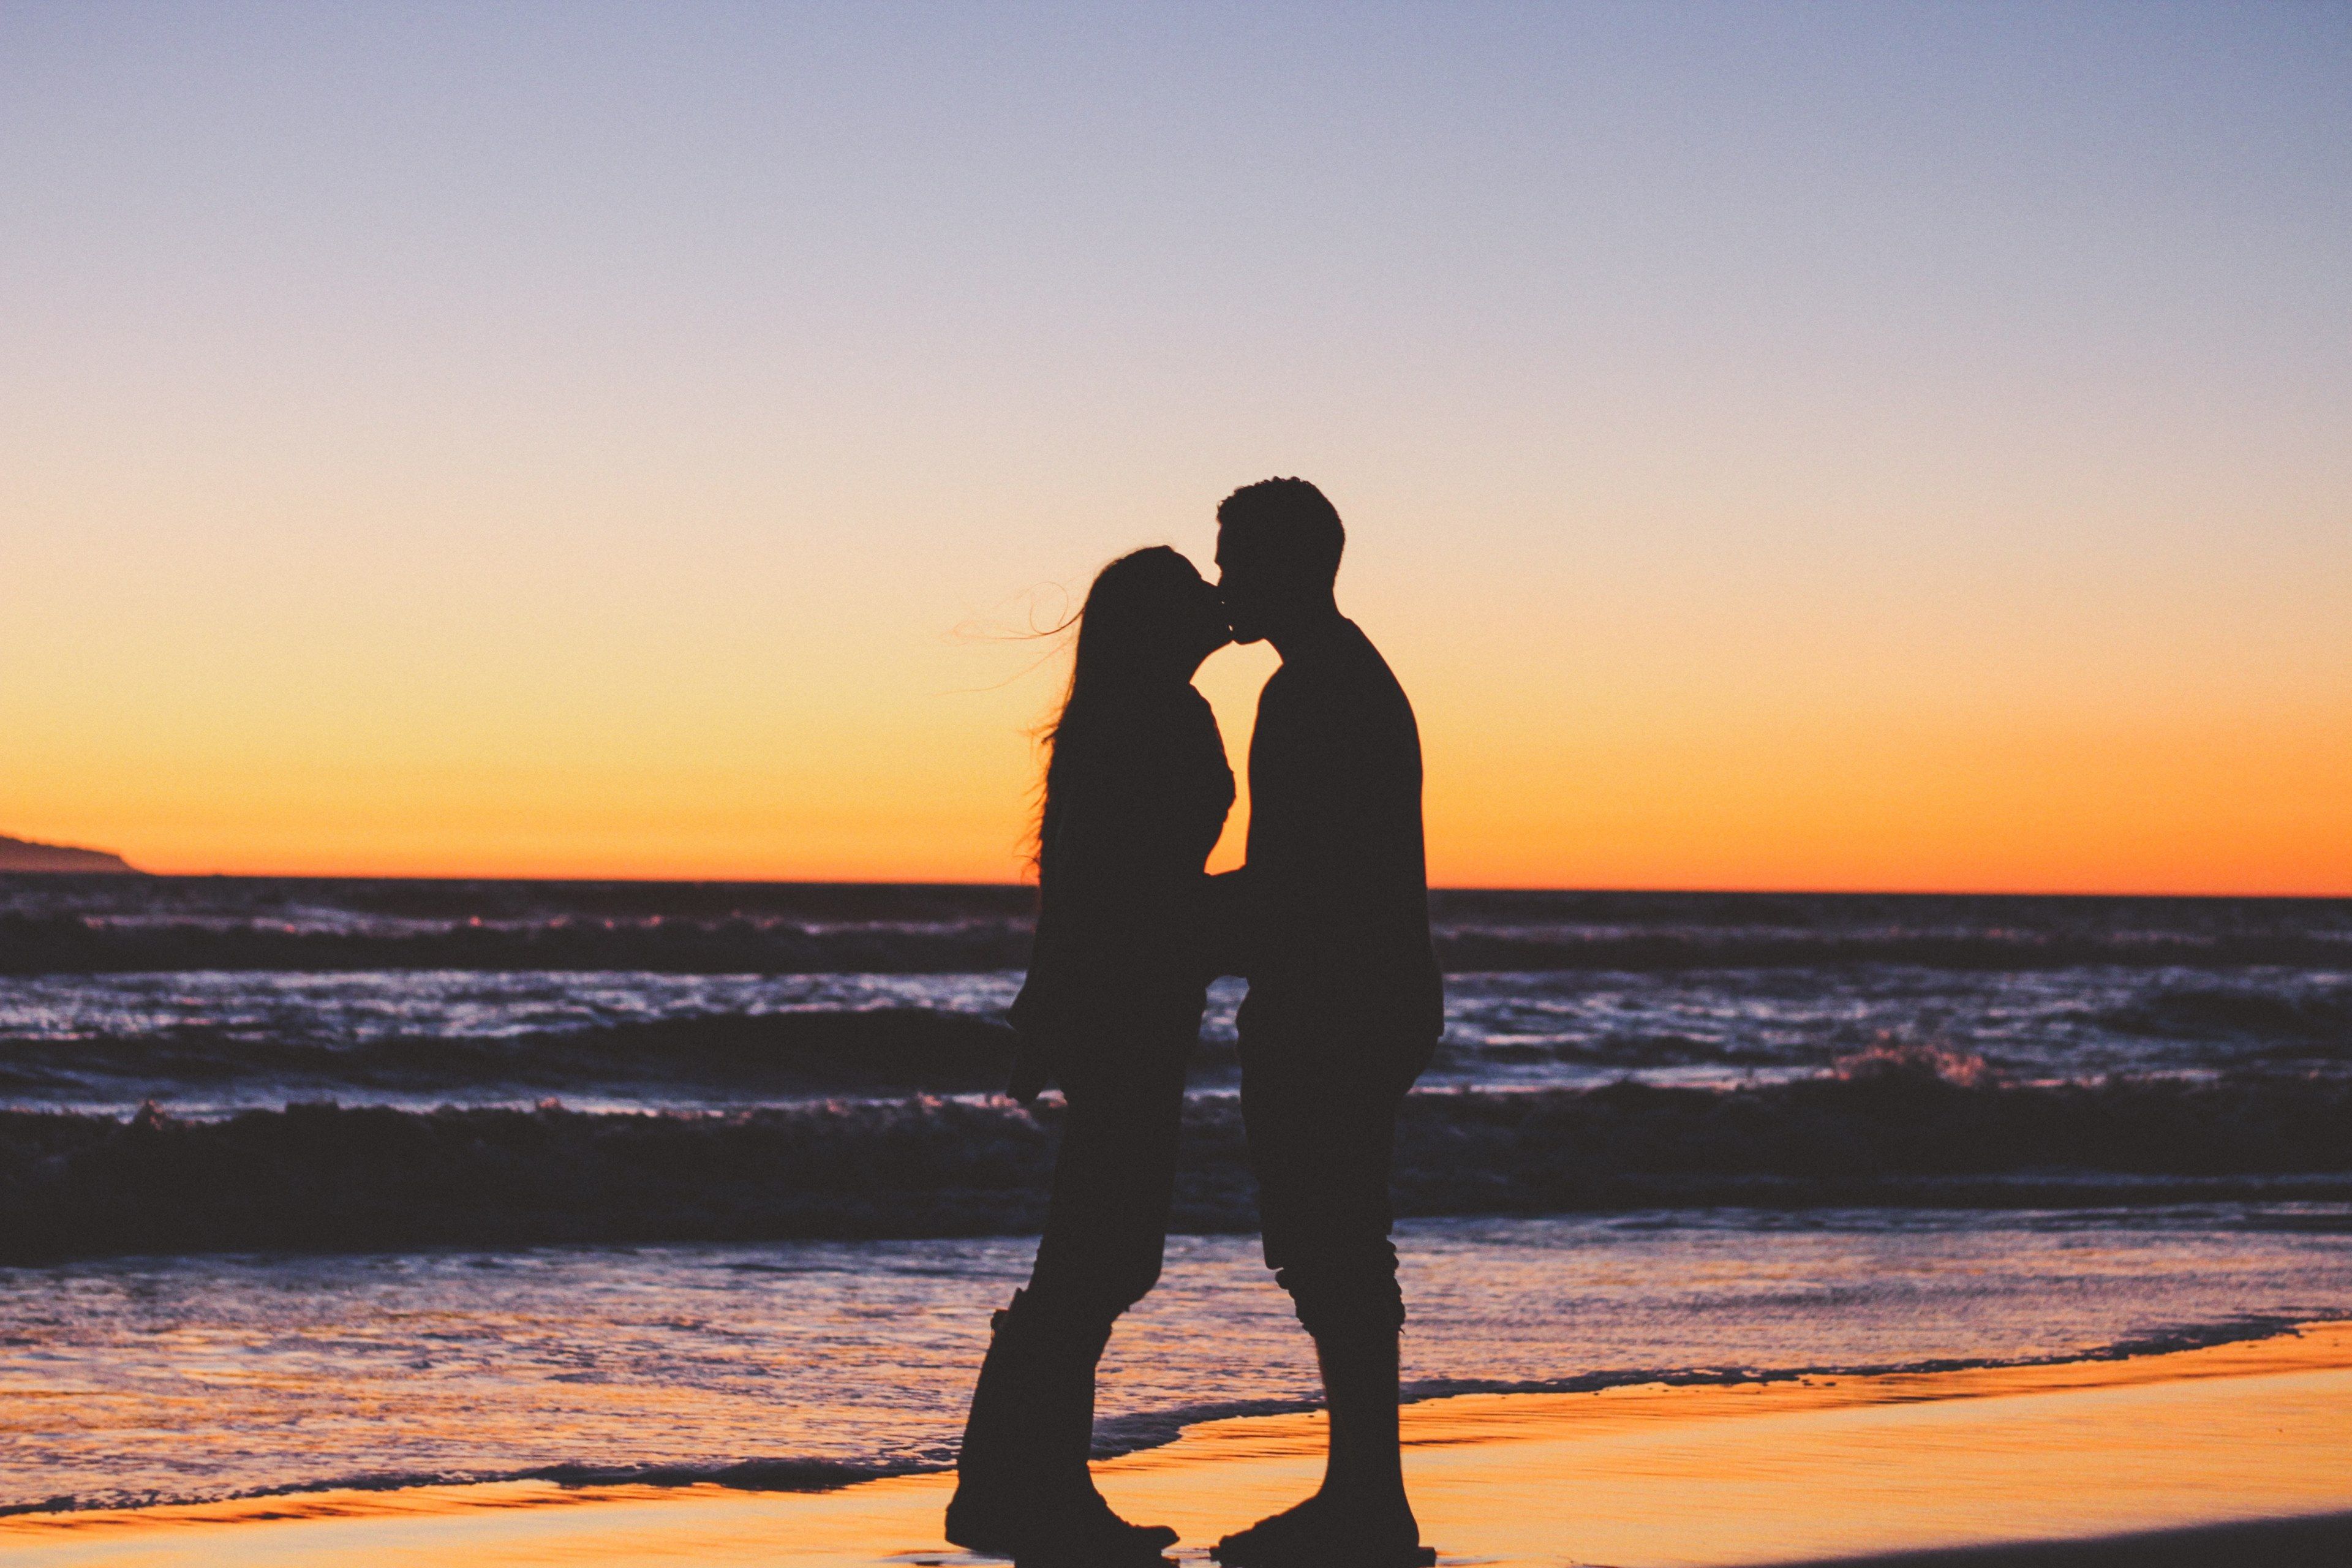 Wallpaper / girlfriend and boyfriend share a kiss at sunset on the beach in silhouette, happily ever after 4k wallpaper